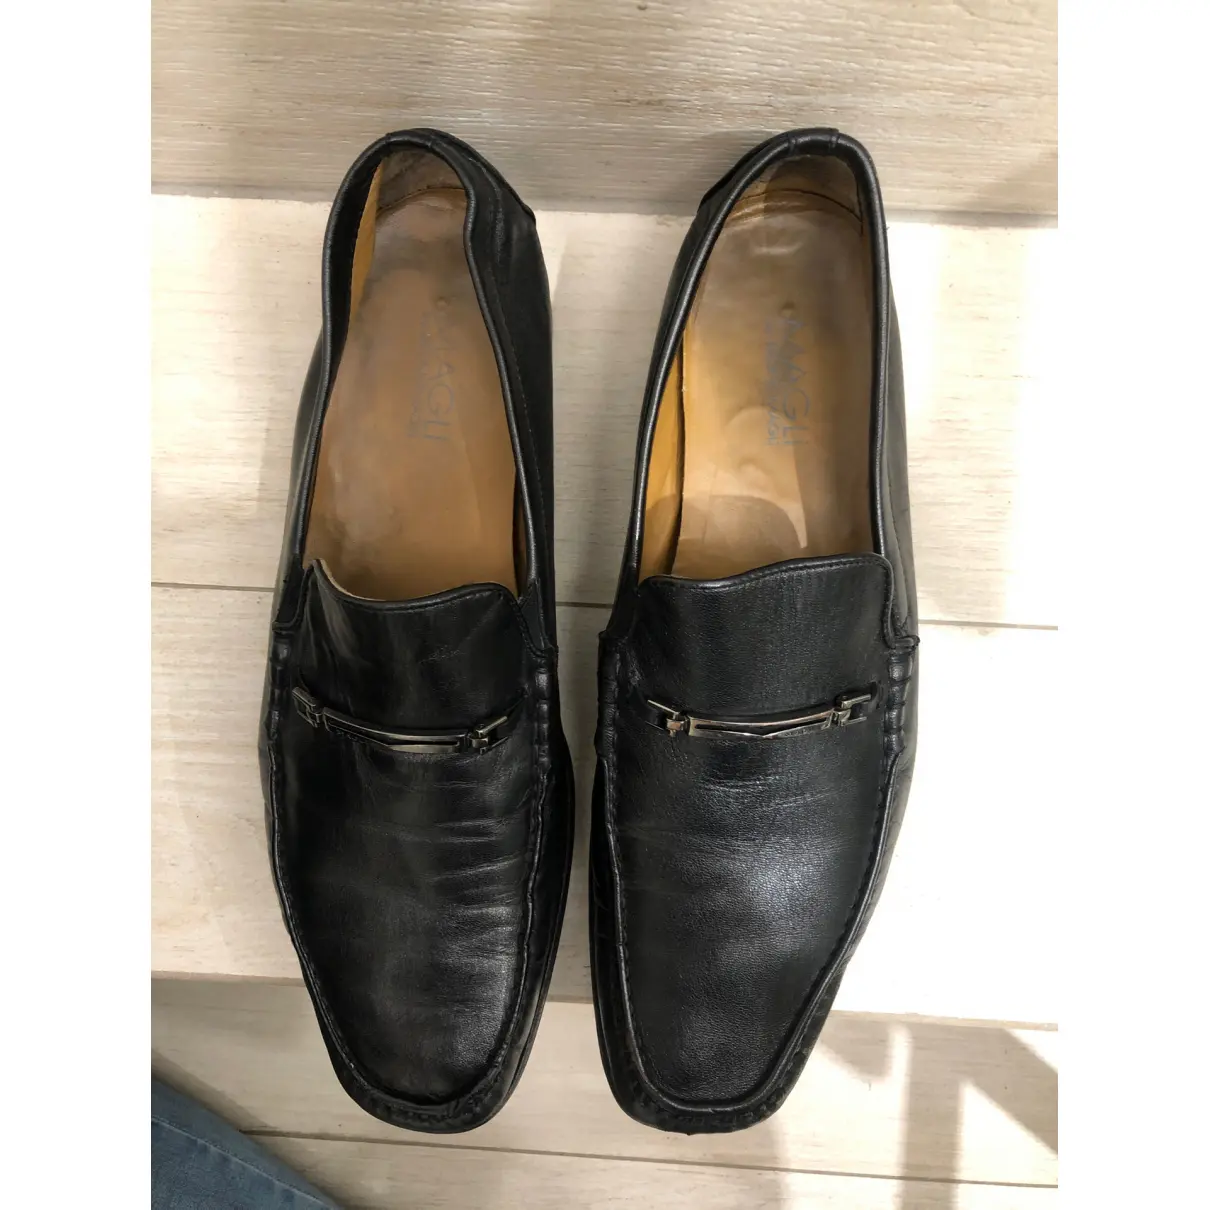 Buy Bruno Magli Leather flats online